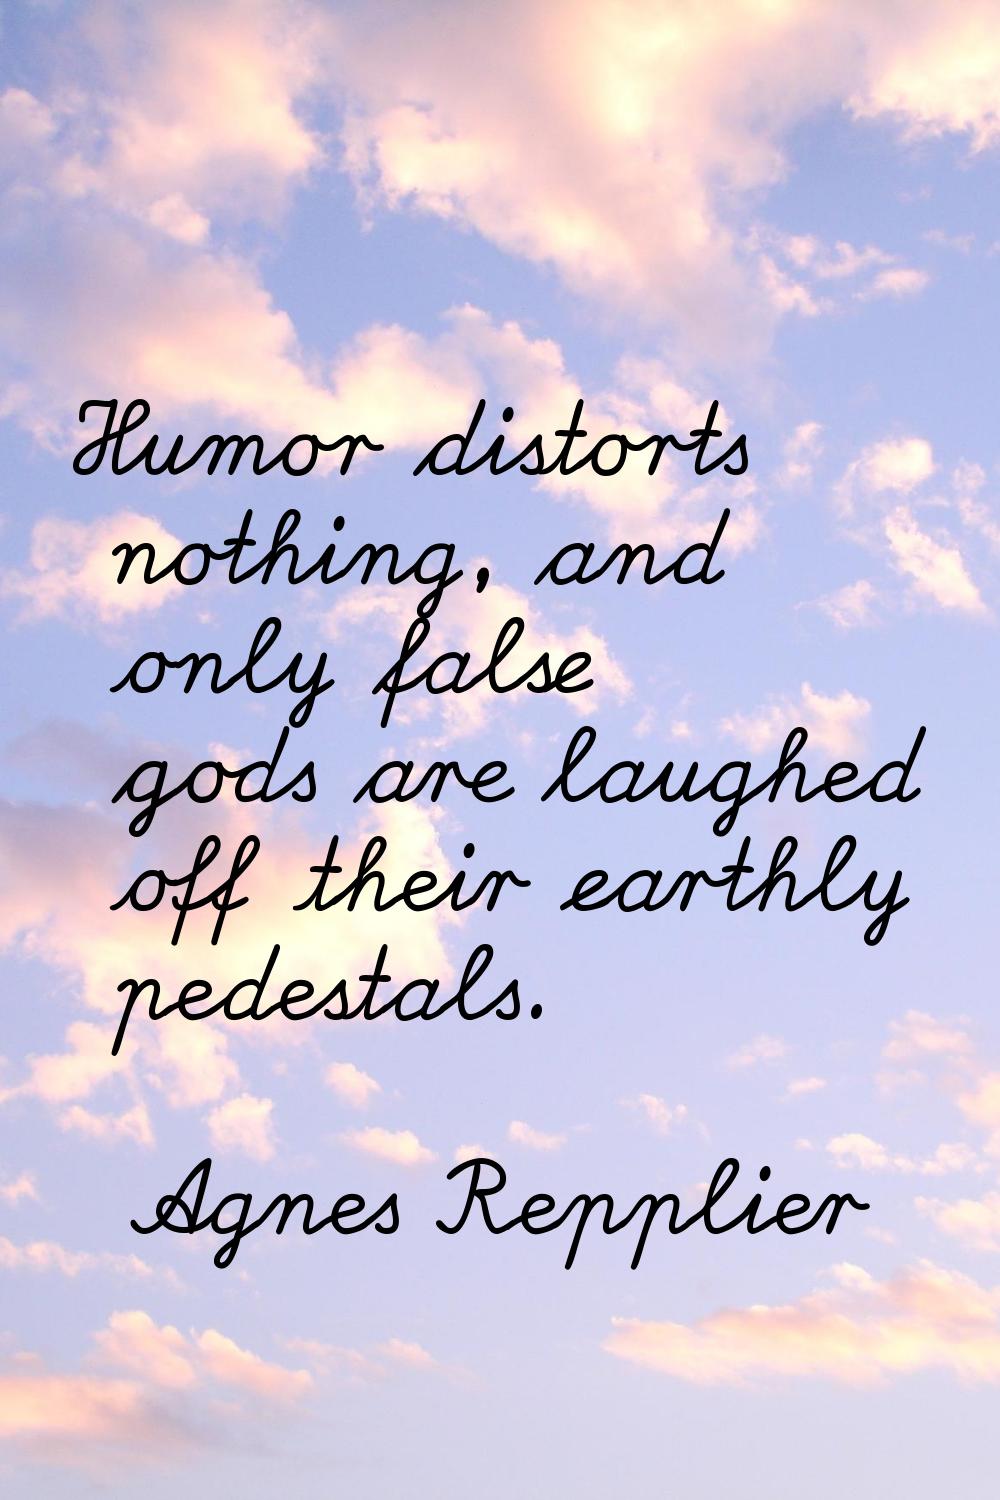 Humor distorts nothing, and only false gods are laughed off their earthly pedestals.